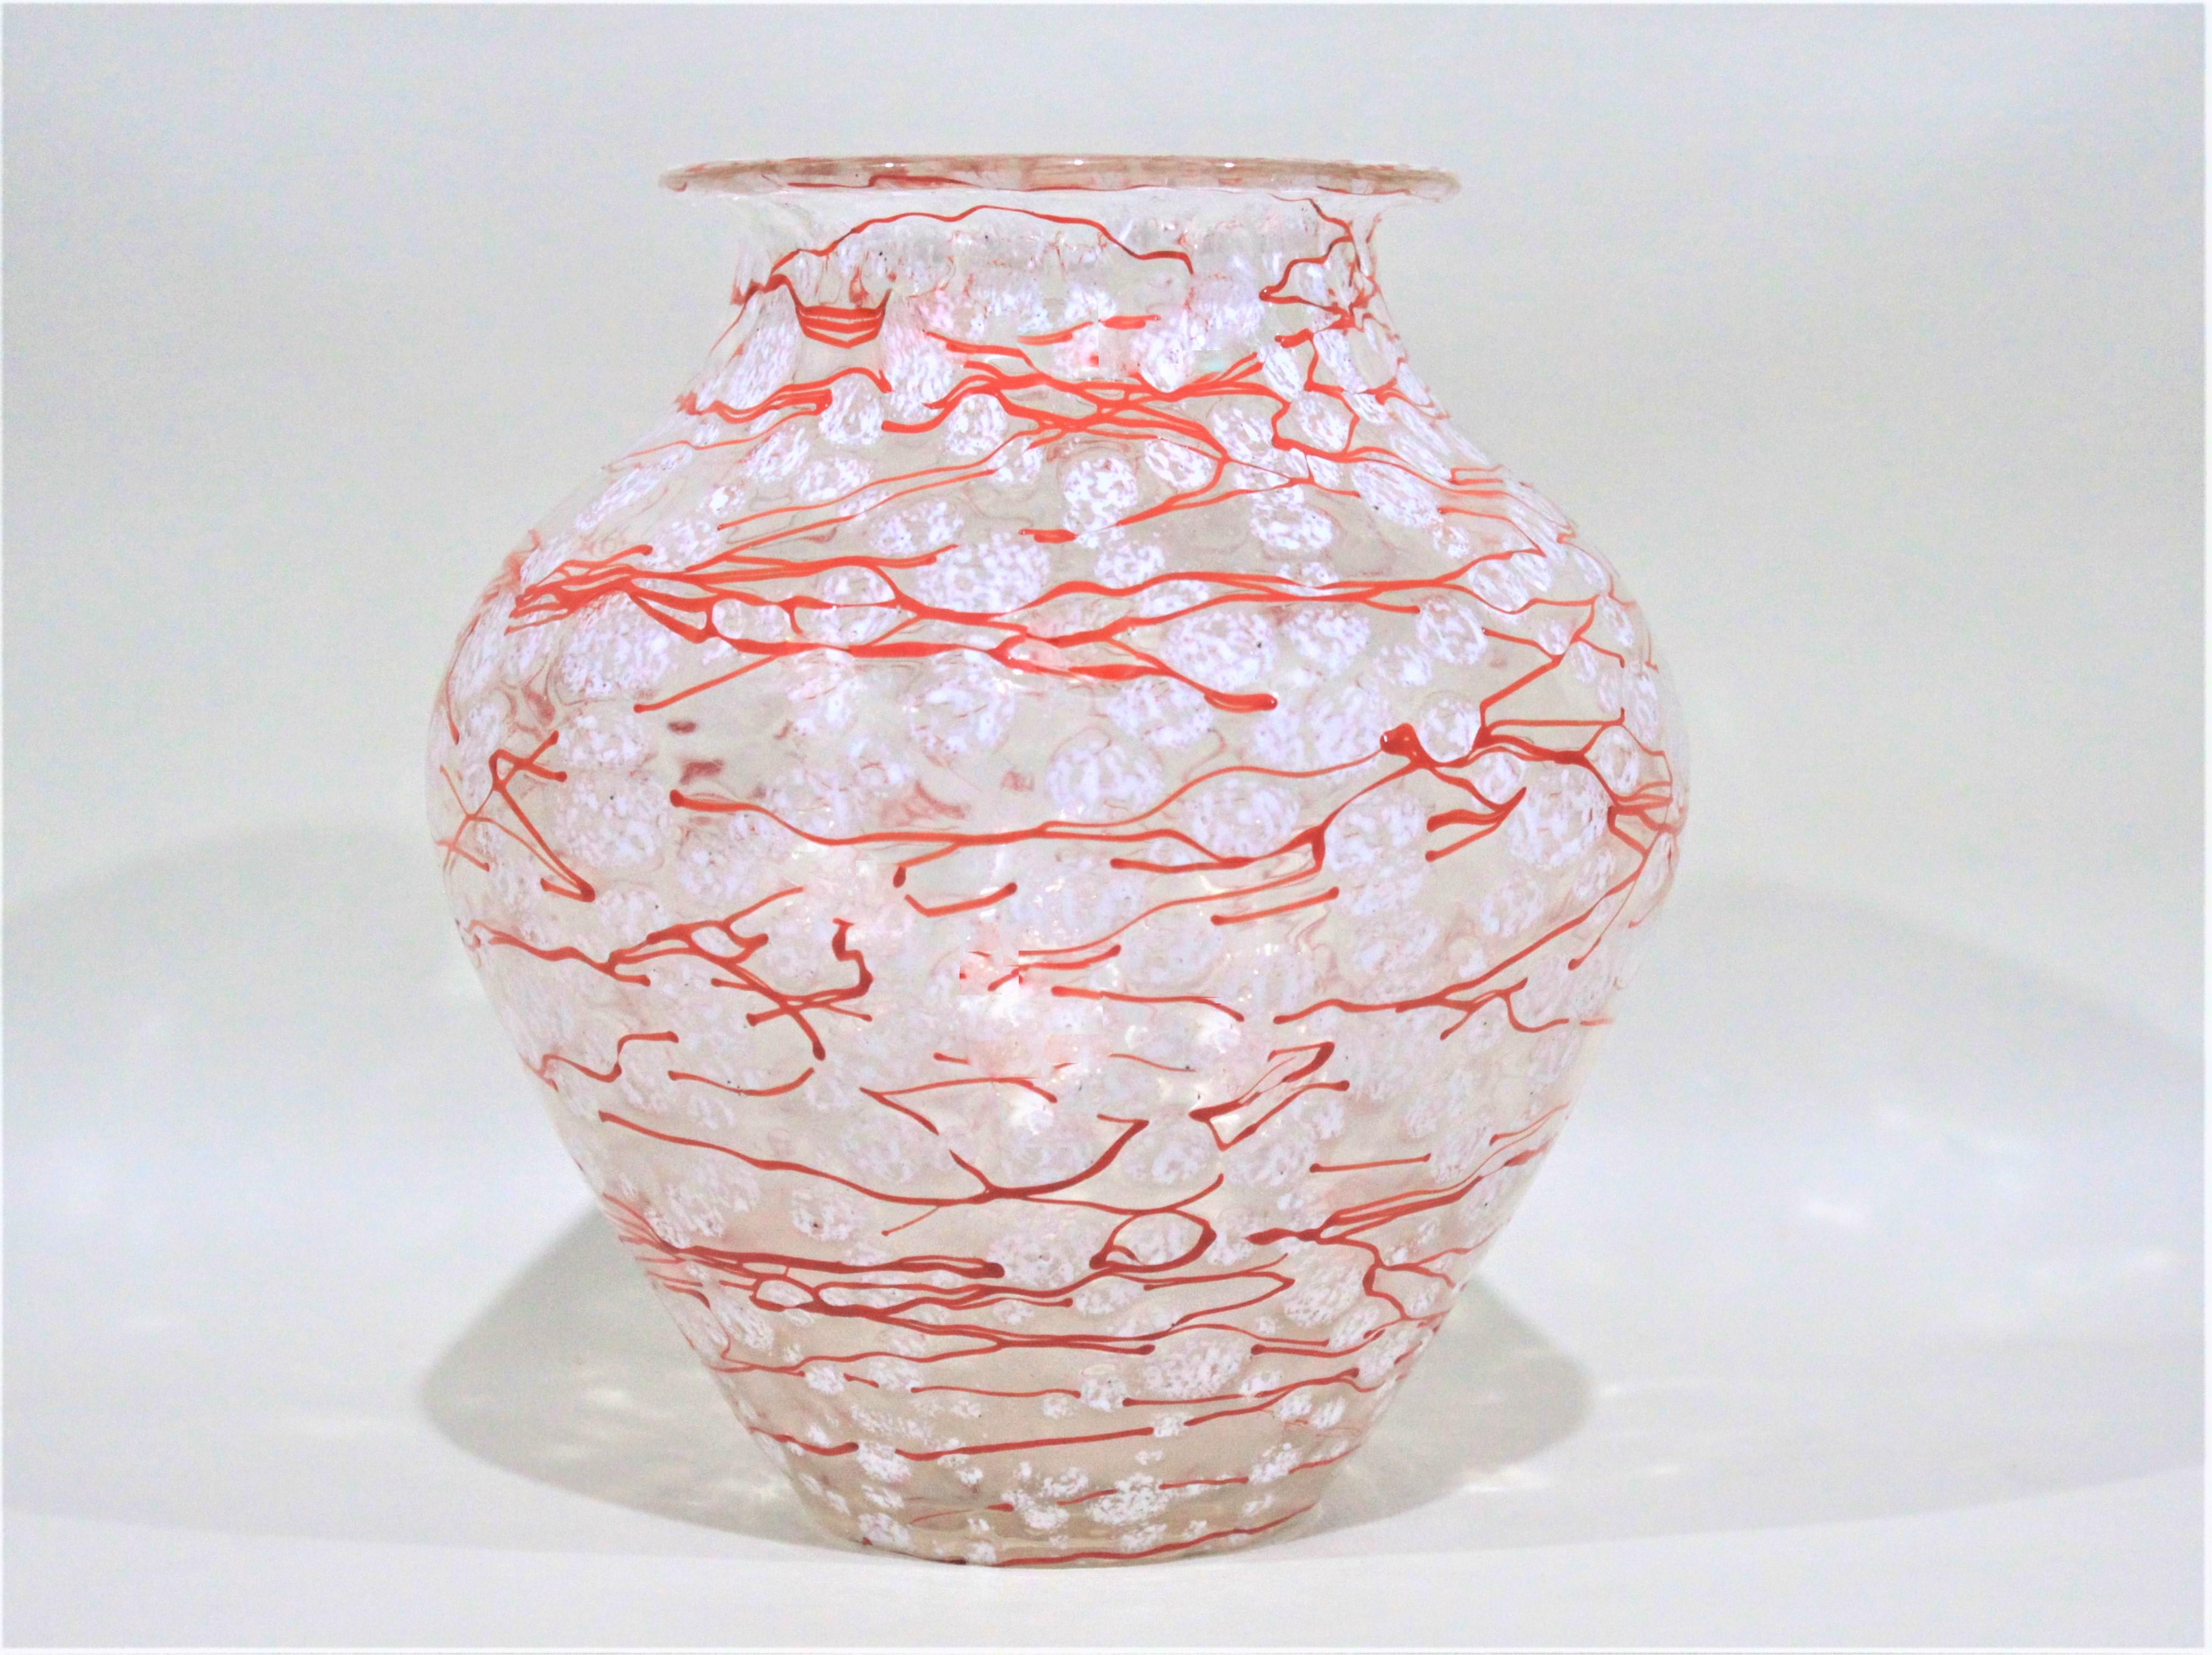 This large art glass vase by Loetz dates from the 1930s and is done by Ausfuelrung C. Schneelflocken in the pattern known as 'Snowflakes'. This vase has been executed with a series of orange fine swirls over white droplets of glass representing